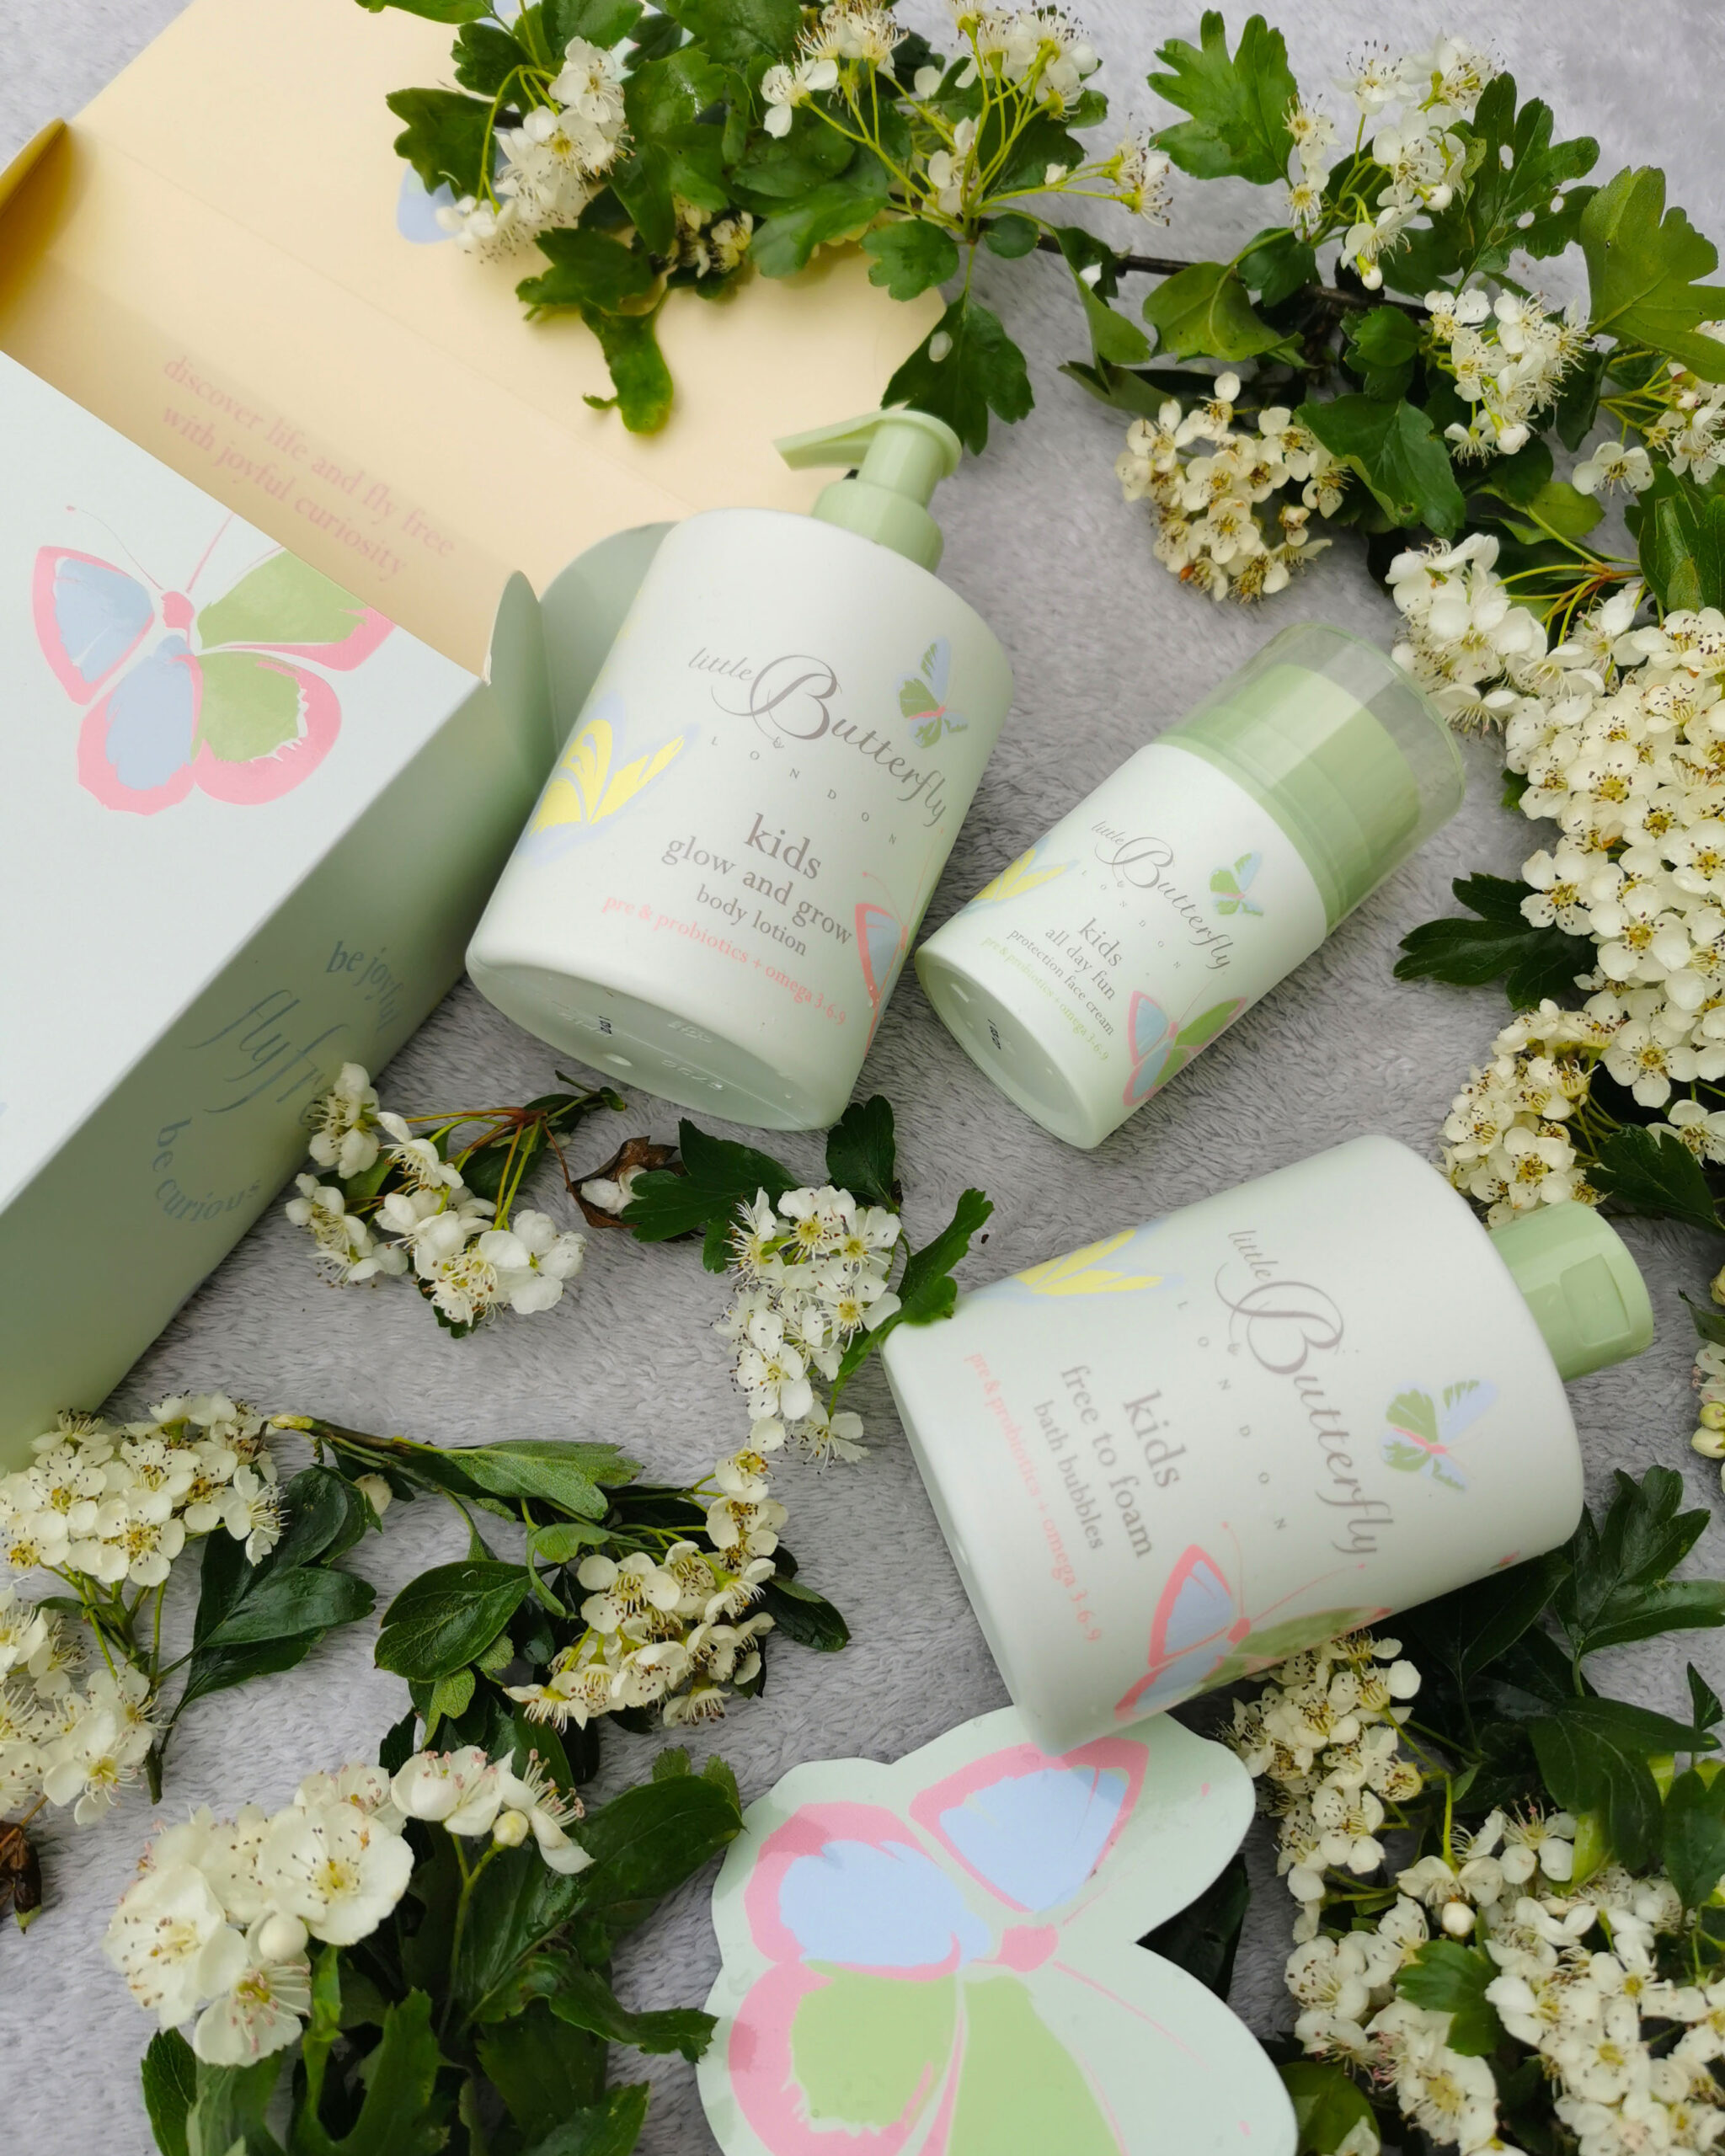 Little Butterfly Kids Bestseller Set, Little Butterfly London, Frenchie Giveaway, Competition, Win, Free, the Frenchie Mummy, Organic Skincare, Mum & Baby, Vegan-Friendly, Natural Skincare, All natural and organic skincare, luxury skincare